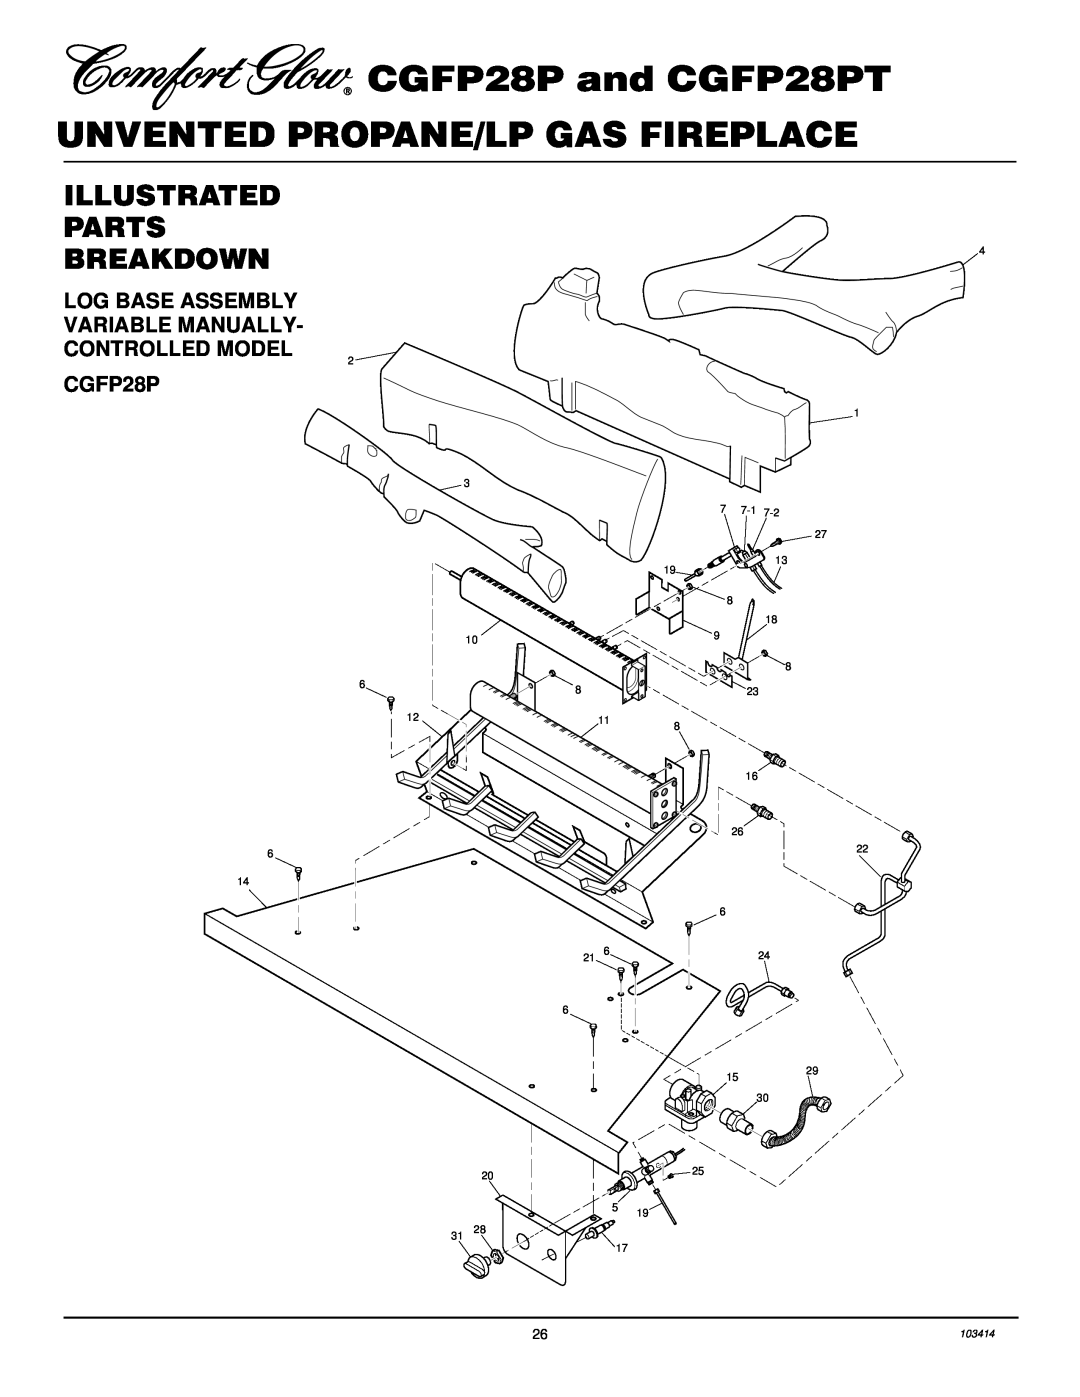 Desa installation manual Illustrated Parts Breakdown, CGFP28P and CGFP28PT, Unvented Propane/Lp Gas Fireplace, 103414 